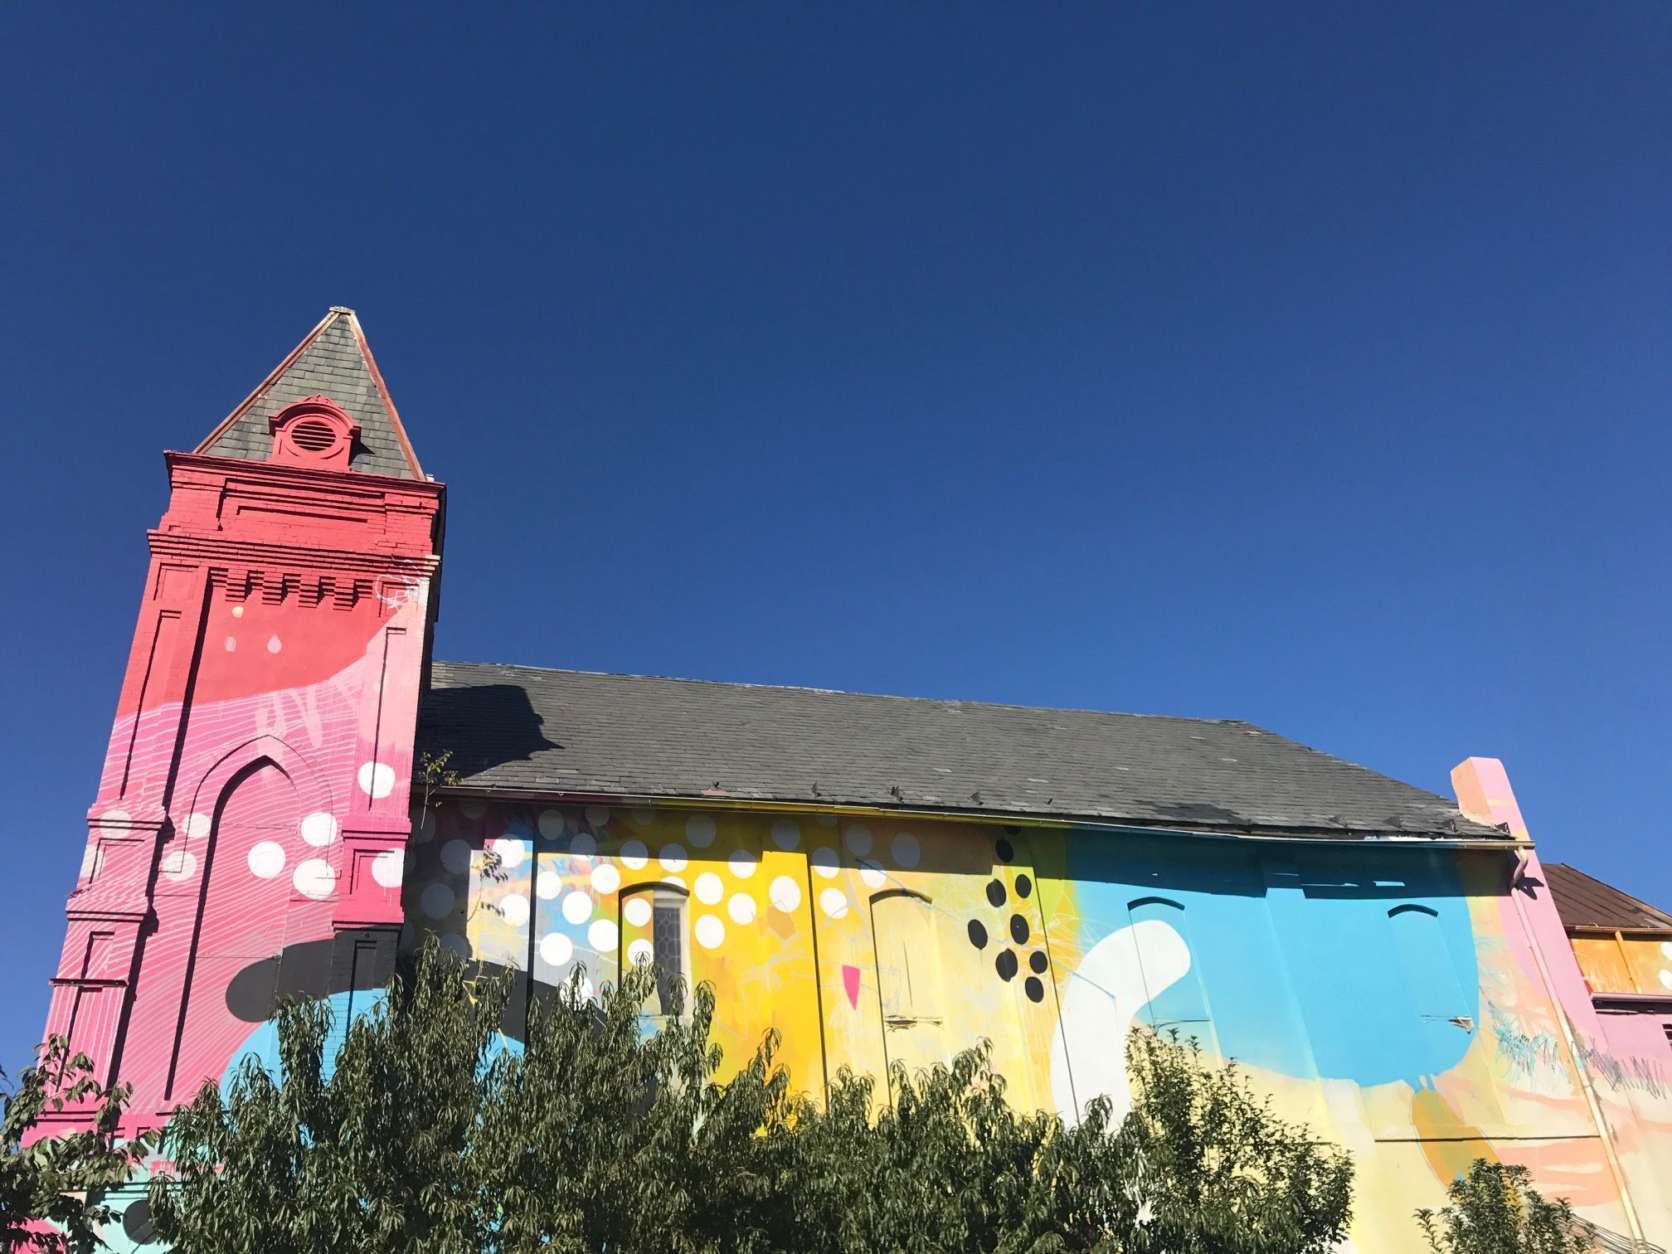 Blind Whino is an old church-turned-arts-space, just a few blocks from Nationals Park. Now through Nov. 4, it is the home to Superfierce, an exhibit and series of events highlighting female artists. (WTOP/Rachel Nania) 